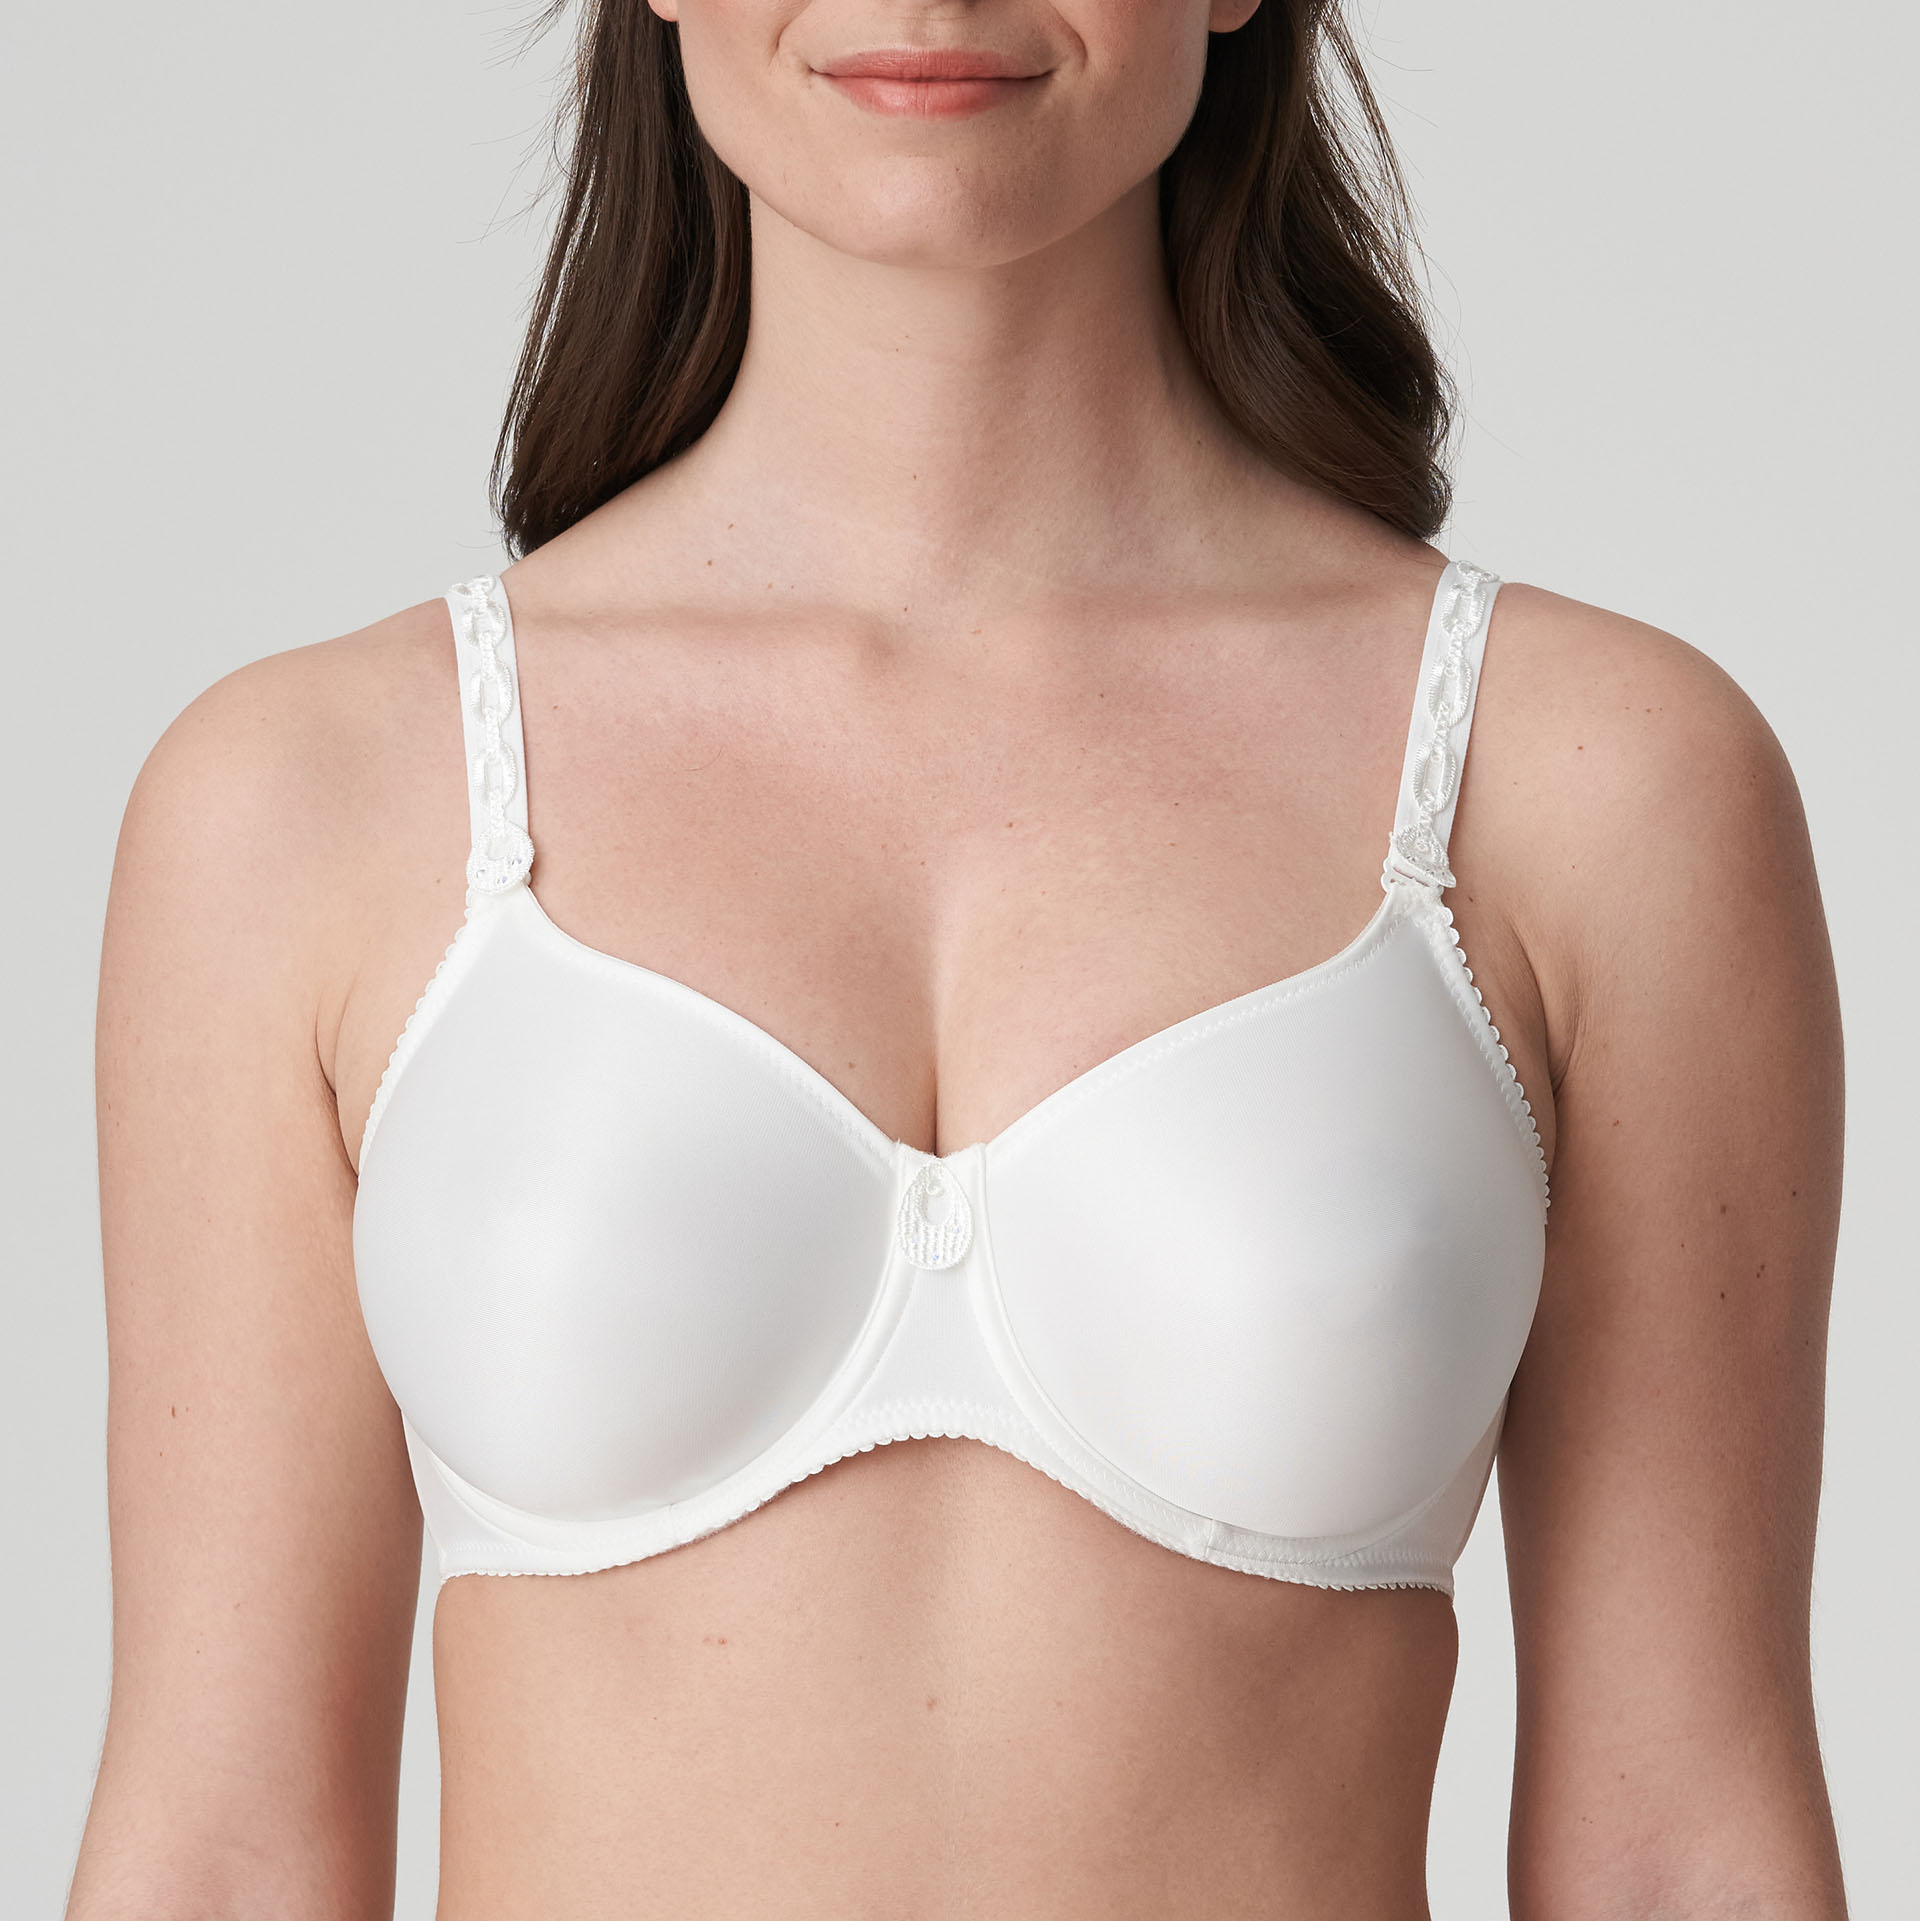 THE BRA STUDIO by Lulabelle on X: Sometimes a girl just needs a basic bra PRIMA  DONNA SATIN. B-H Cup. Book your fitting at  # primadonna #lingerie #brathatfits  / X